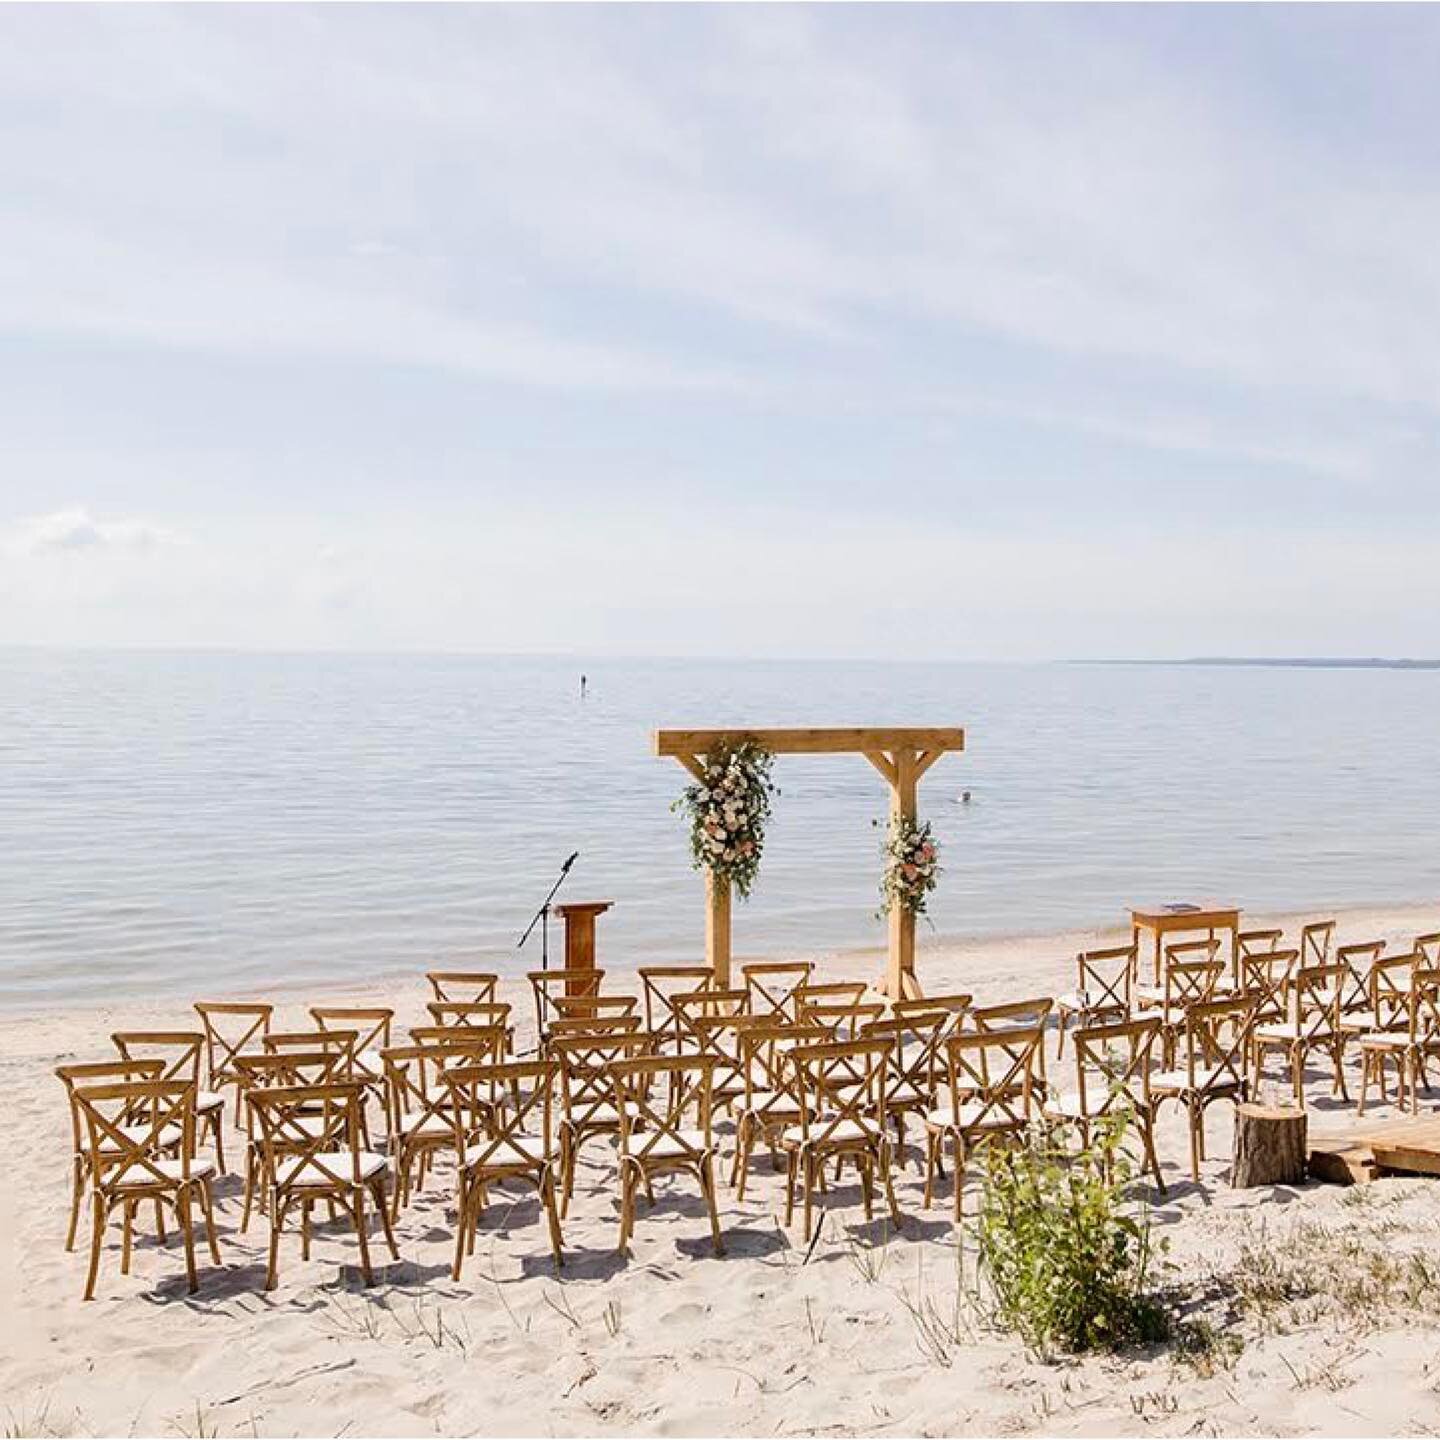 Over here editing the weekend away &amp; reliving all the beachy wedding vibes from Briana + Brodie&rsquo;s lakeside ceremony. Summer, where did you go?!

#aaronandtaraphotography #beachwedding #weddingphotography #weddingceremony #beachvibes #beachc